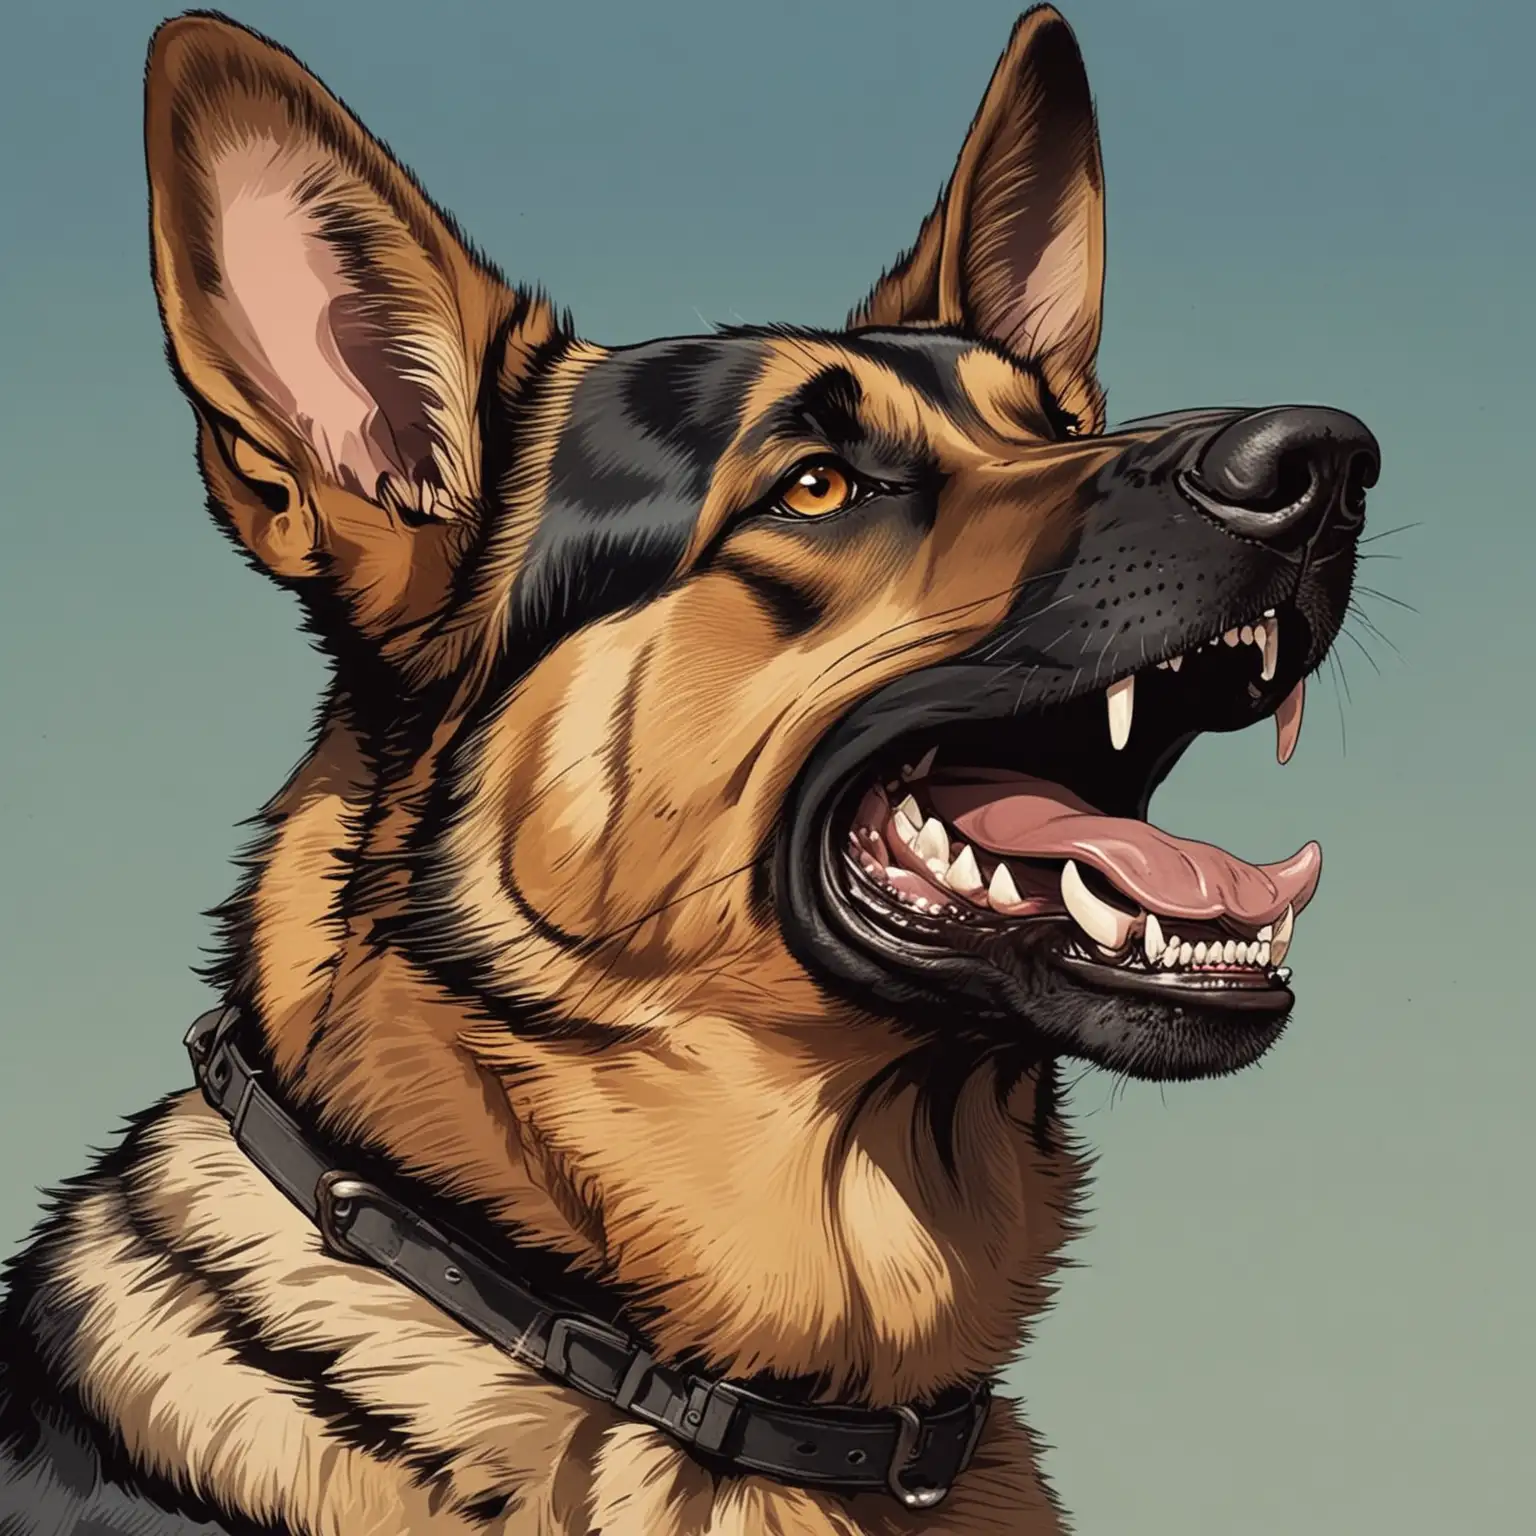 Avatar for strategy game in 1940s, unit - agressive german shepard dog barking, drawn in comic style colored